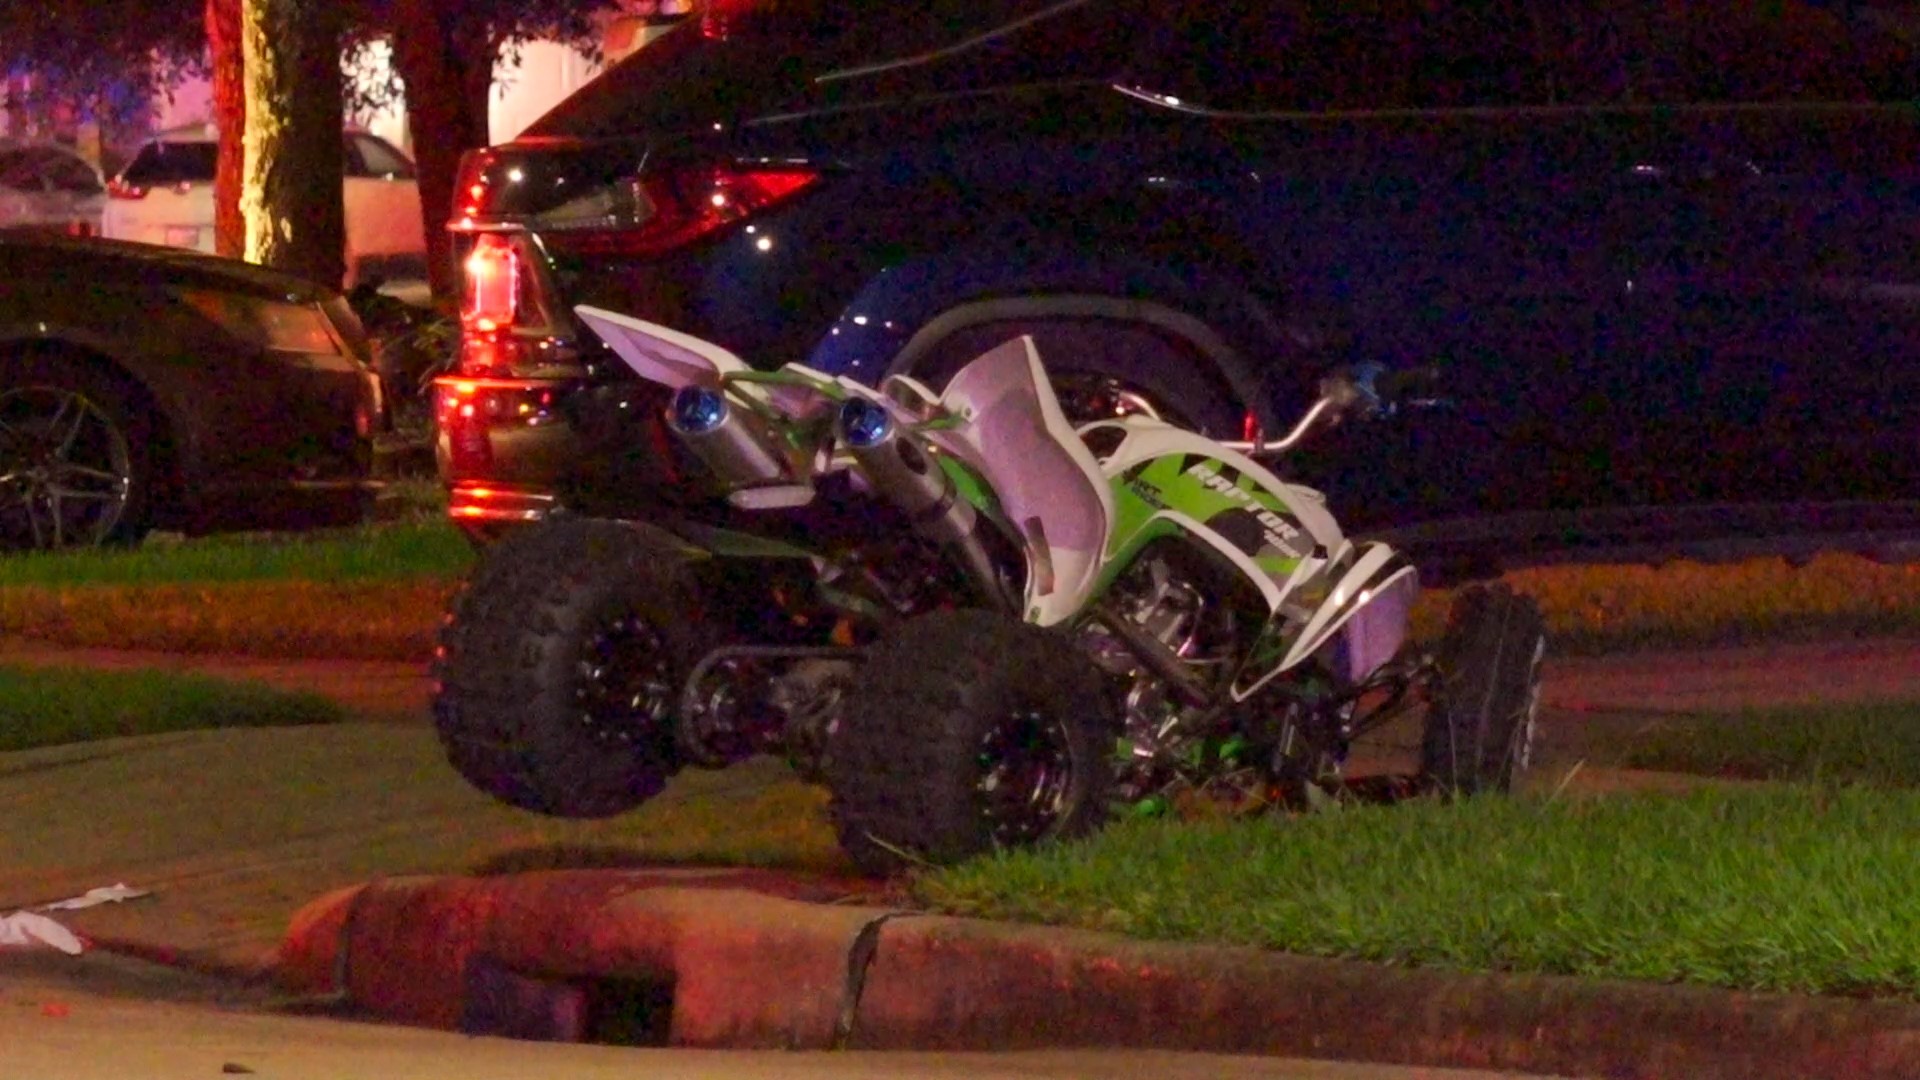 Houston police investigators responded to a neighborhood on the northeast side late Tuesday after a deadly ATV crash.